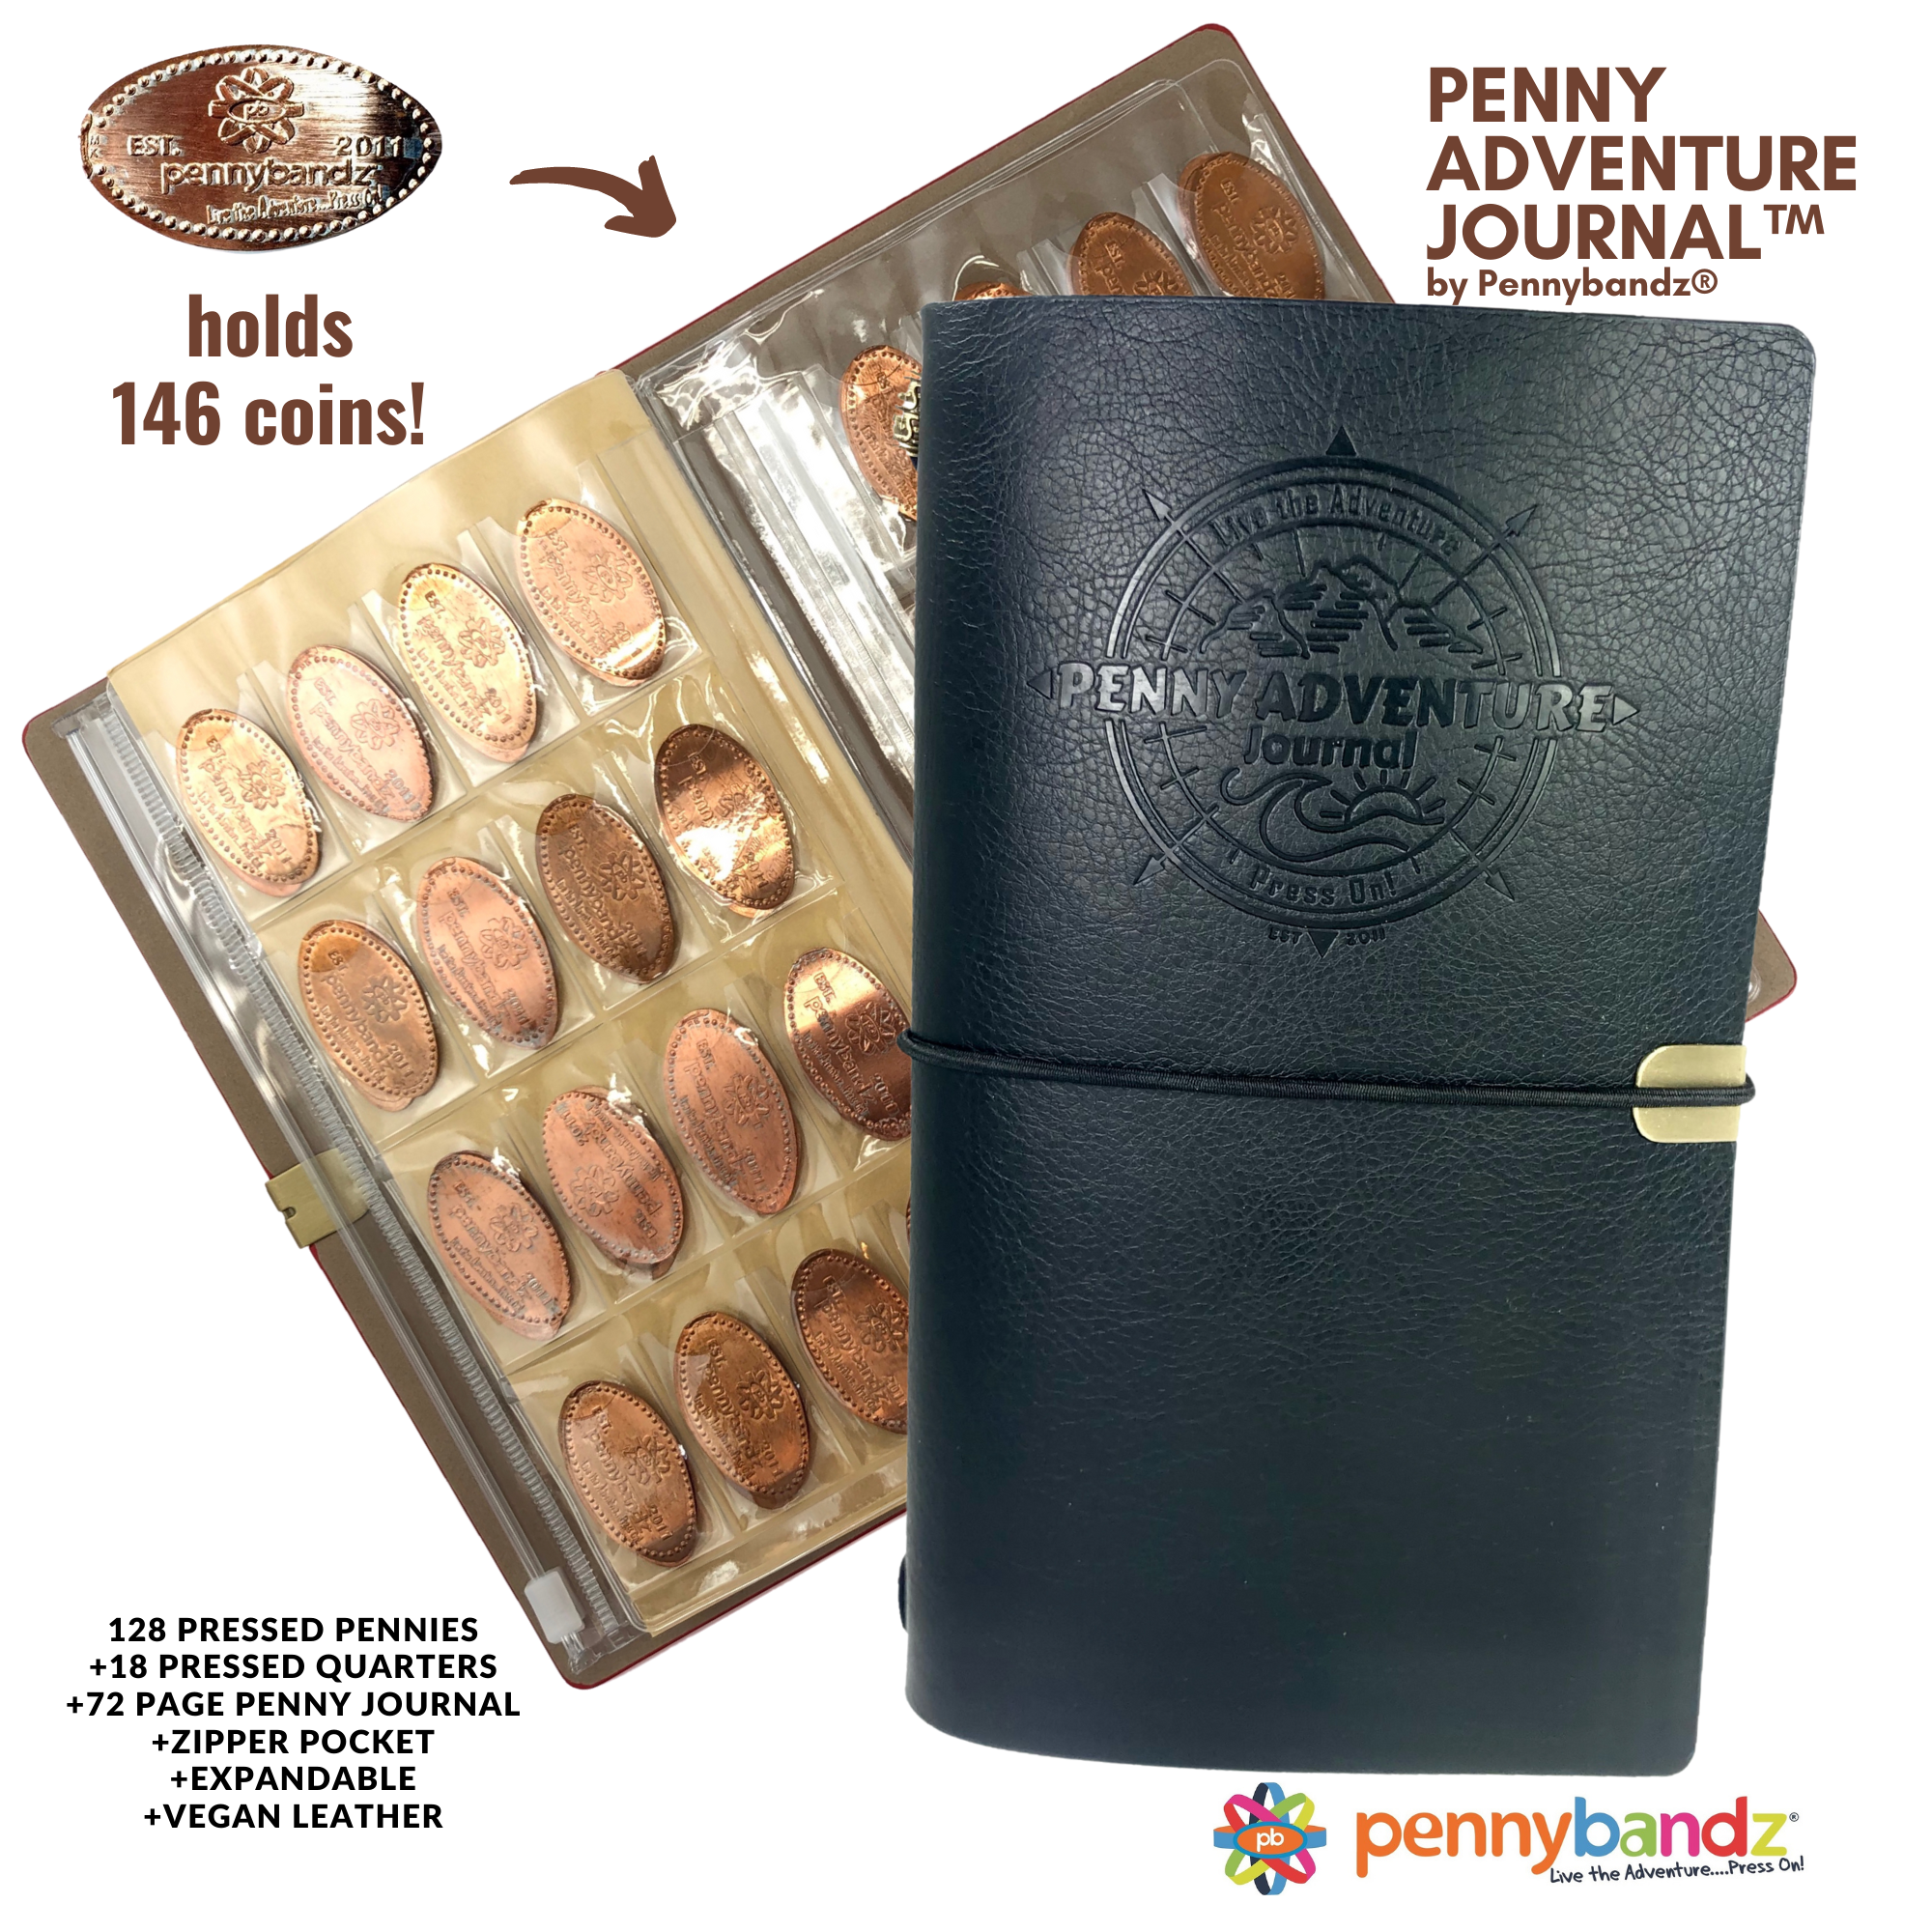 Pennybandz Penny Passport to My Penny Adventures - Souvenir Pressed Penny Passport Holds 48 Coins - Vegan Leather - Every Book Ordered Comes with A